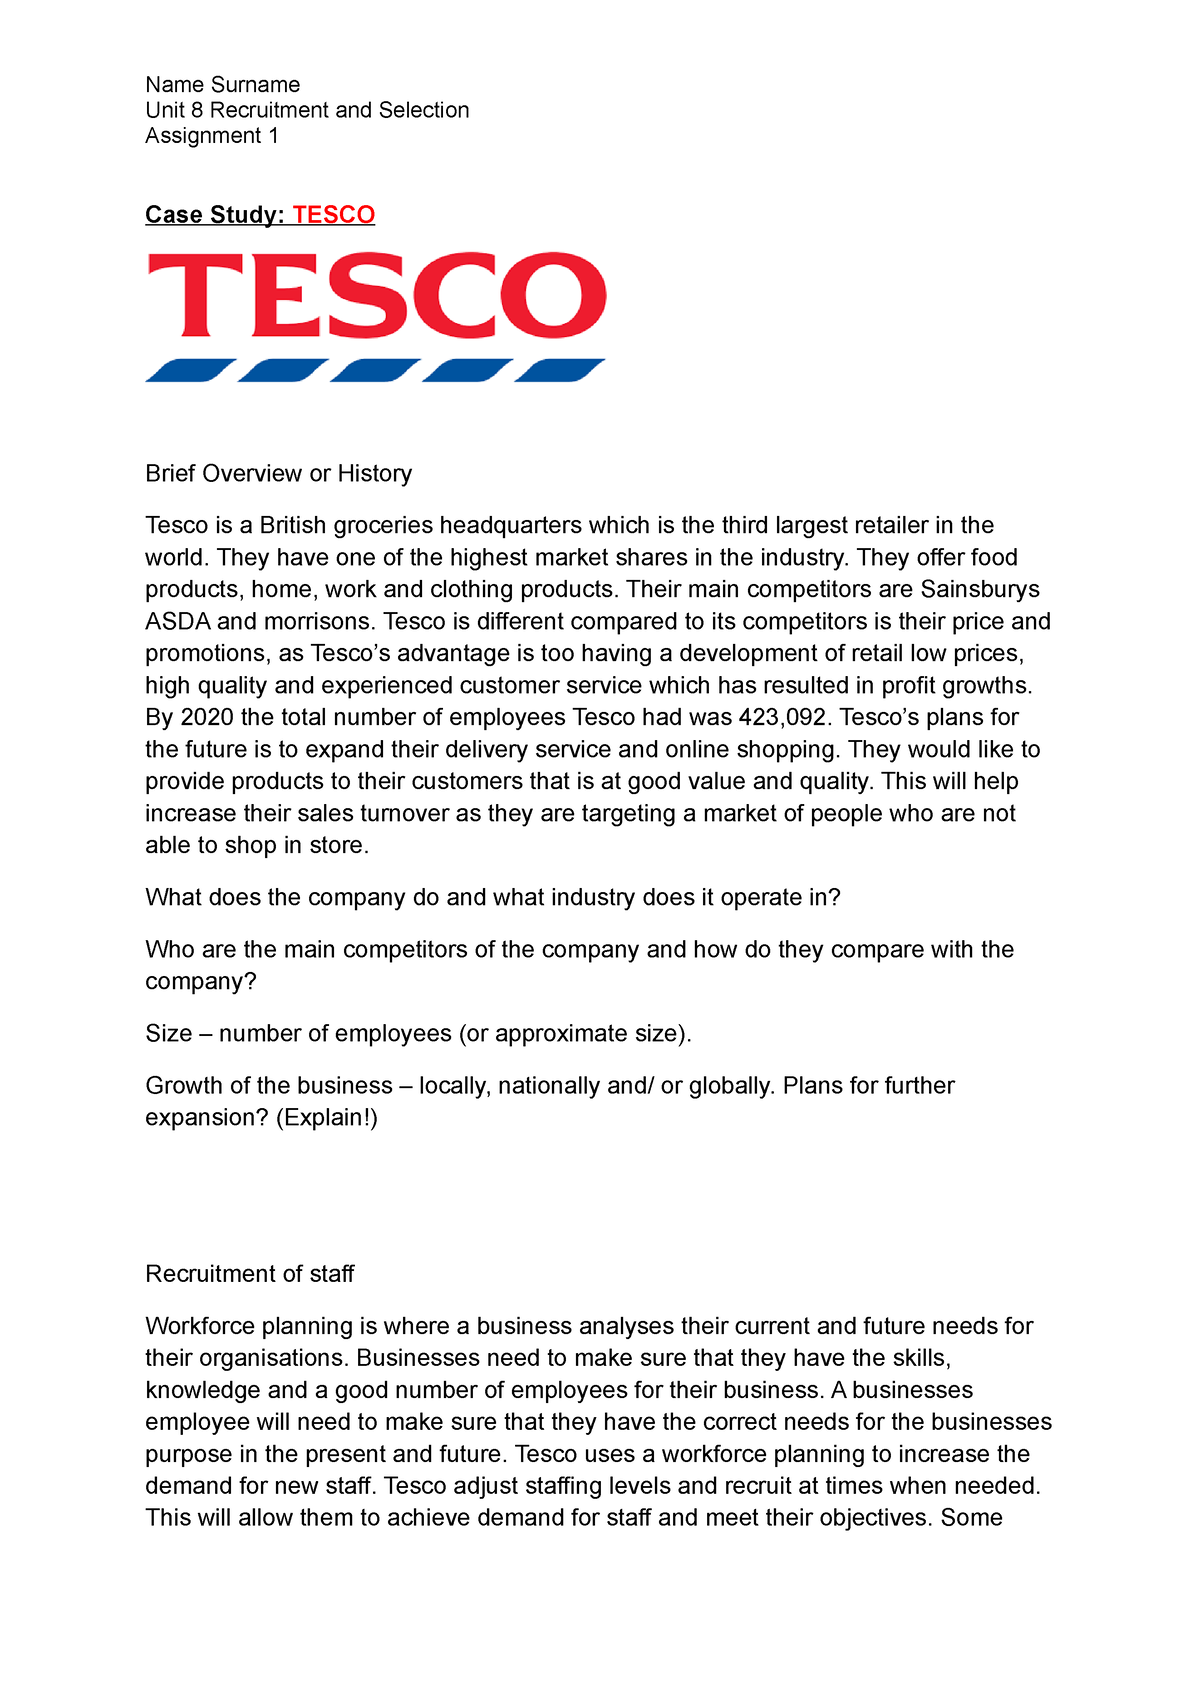 personal statement for tesco job